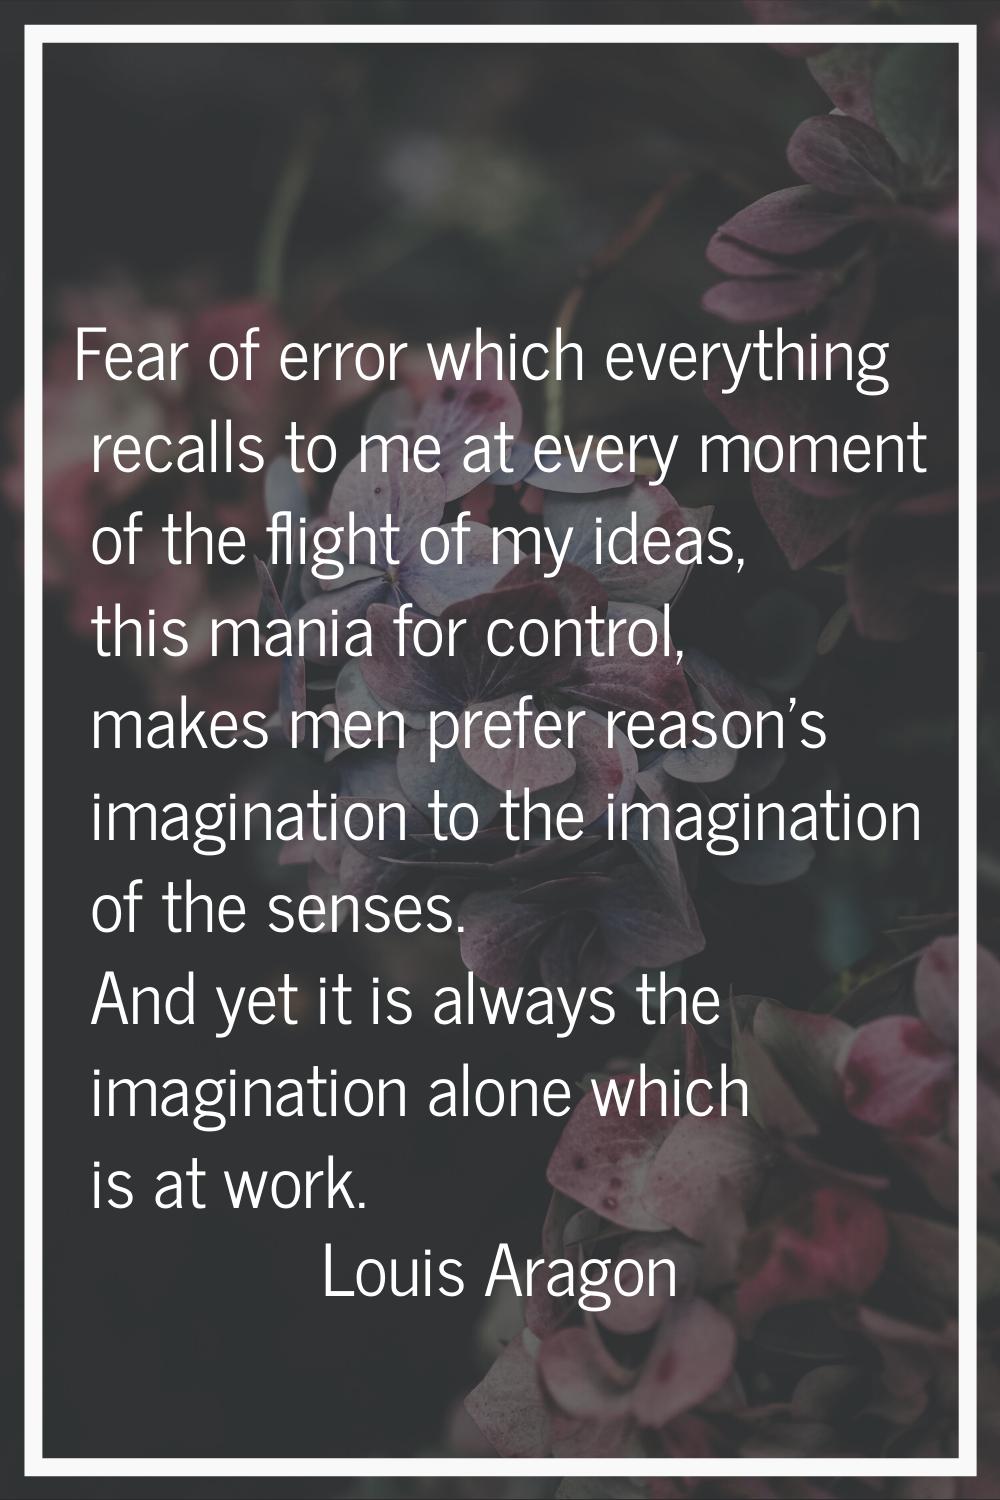 Fear of error which everything recalls to me at every moment of the flight of my ideas, this mania 